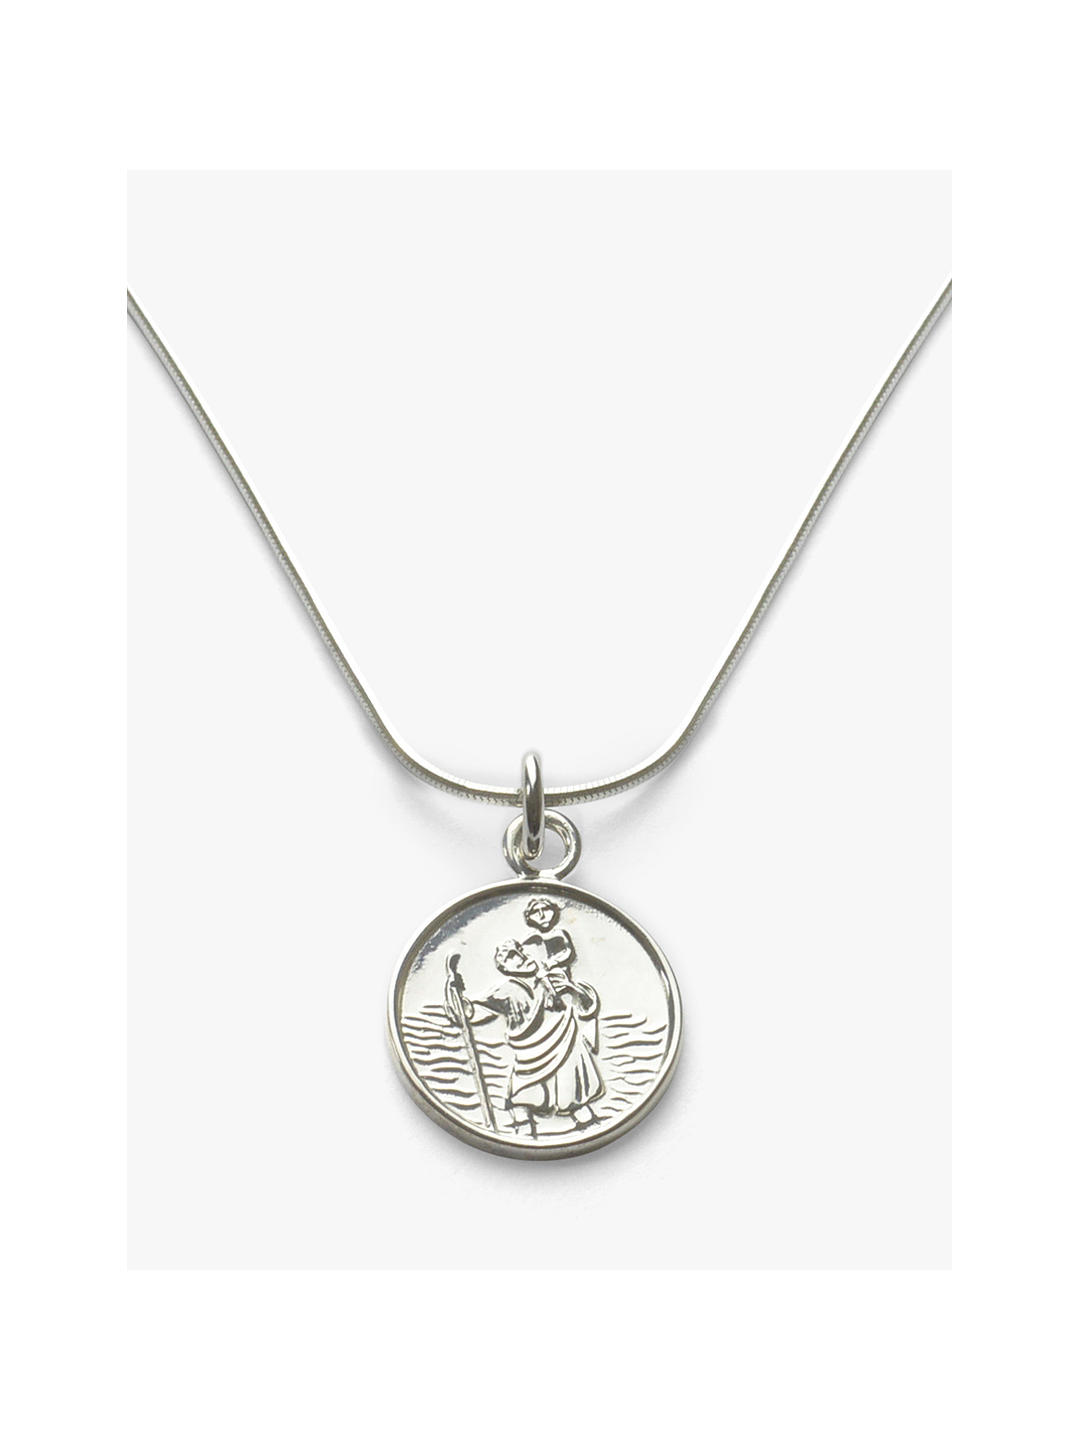 Tales From The Earth Child's Saint Christopher Pendant Necklace, Silver